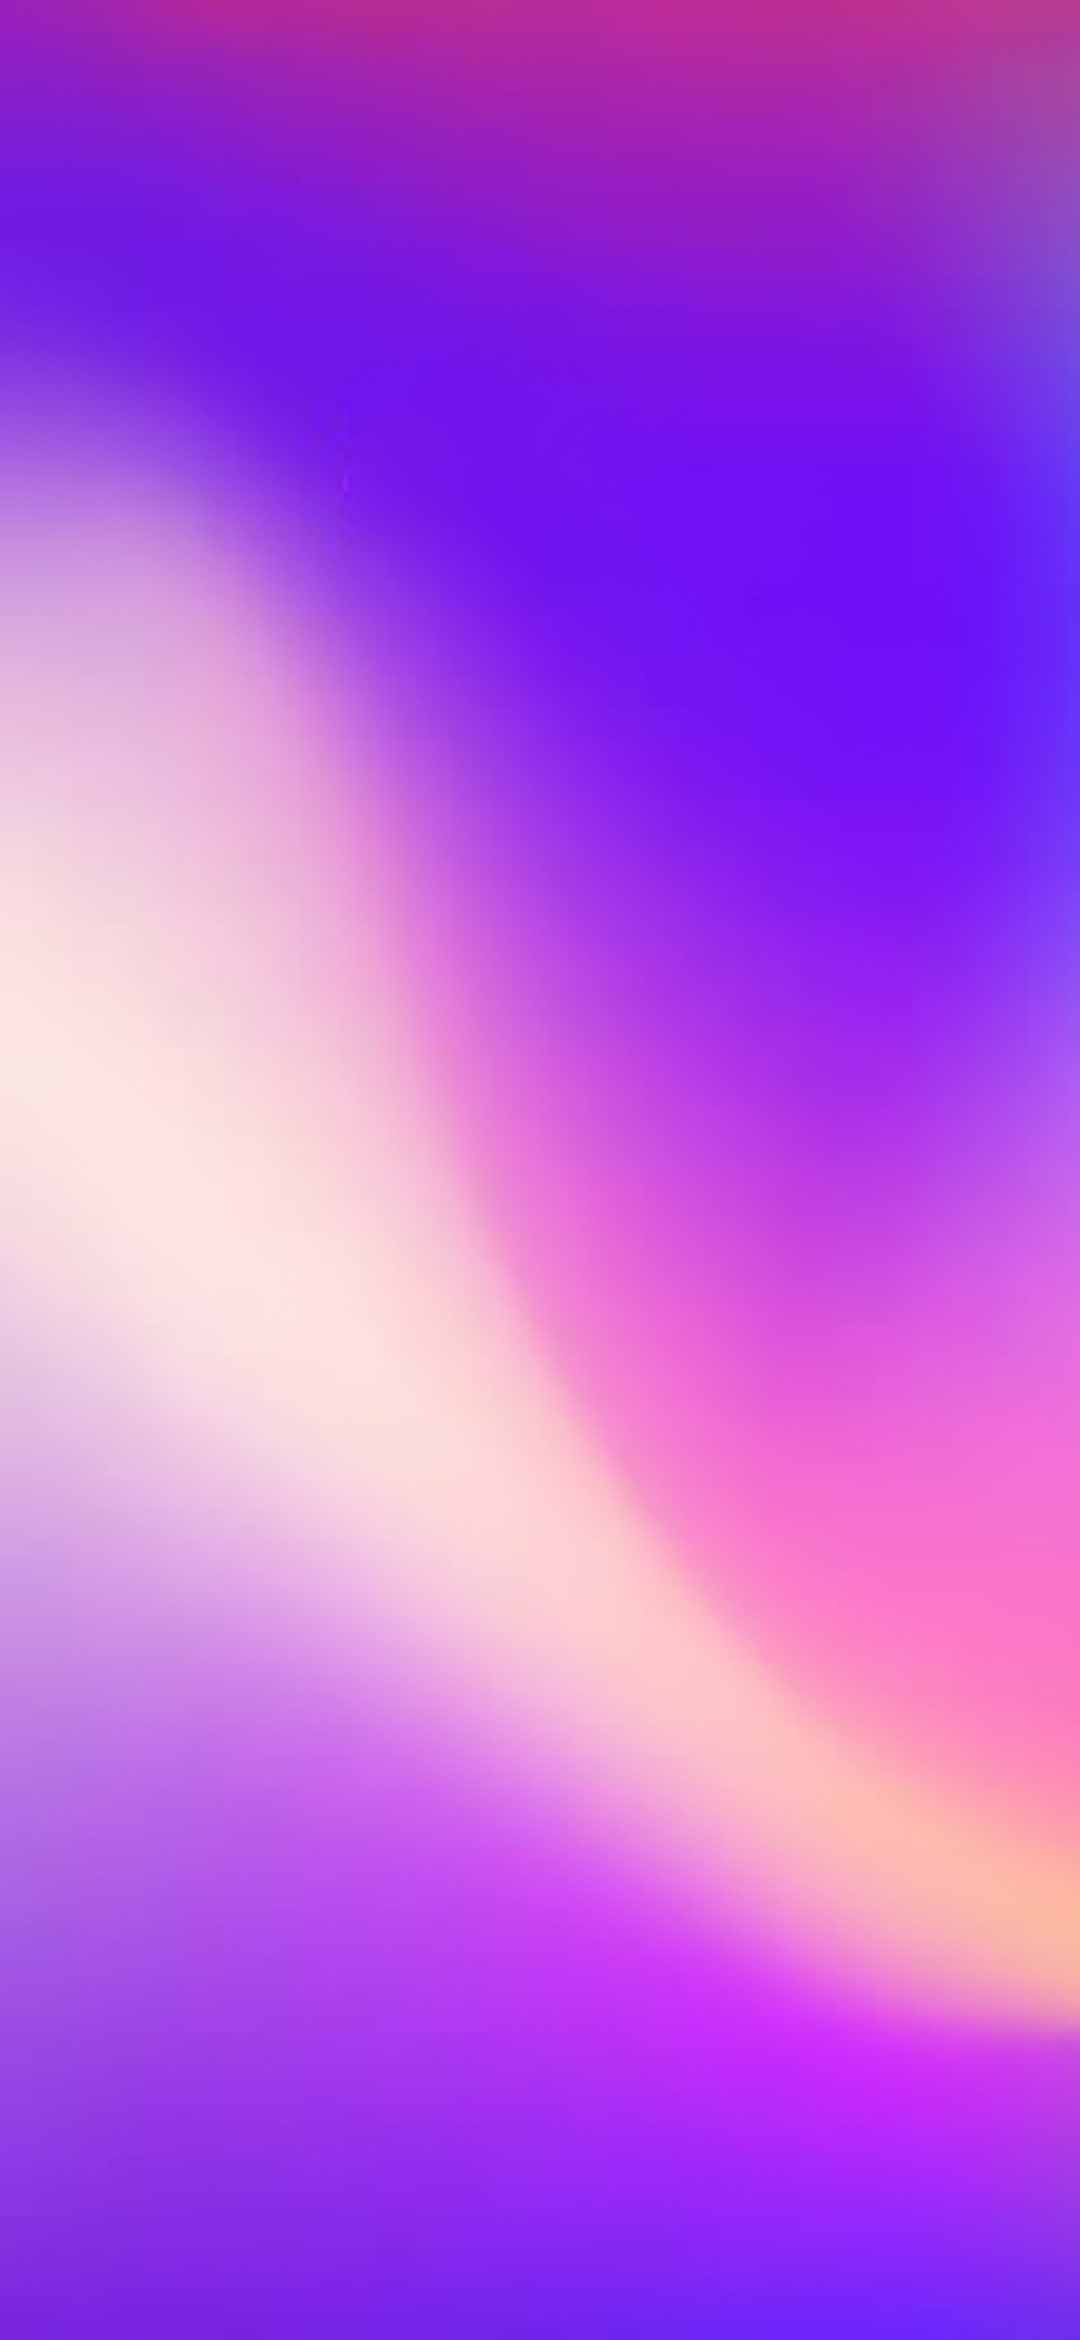 Redmi Note 7 and Redmi Note 7 Pro Wallpapers (Updated)